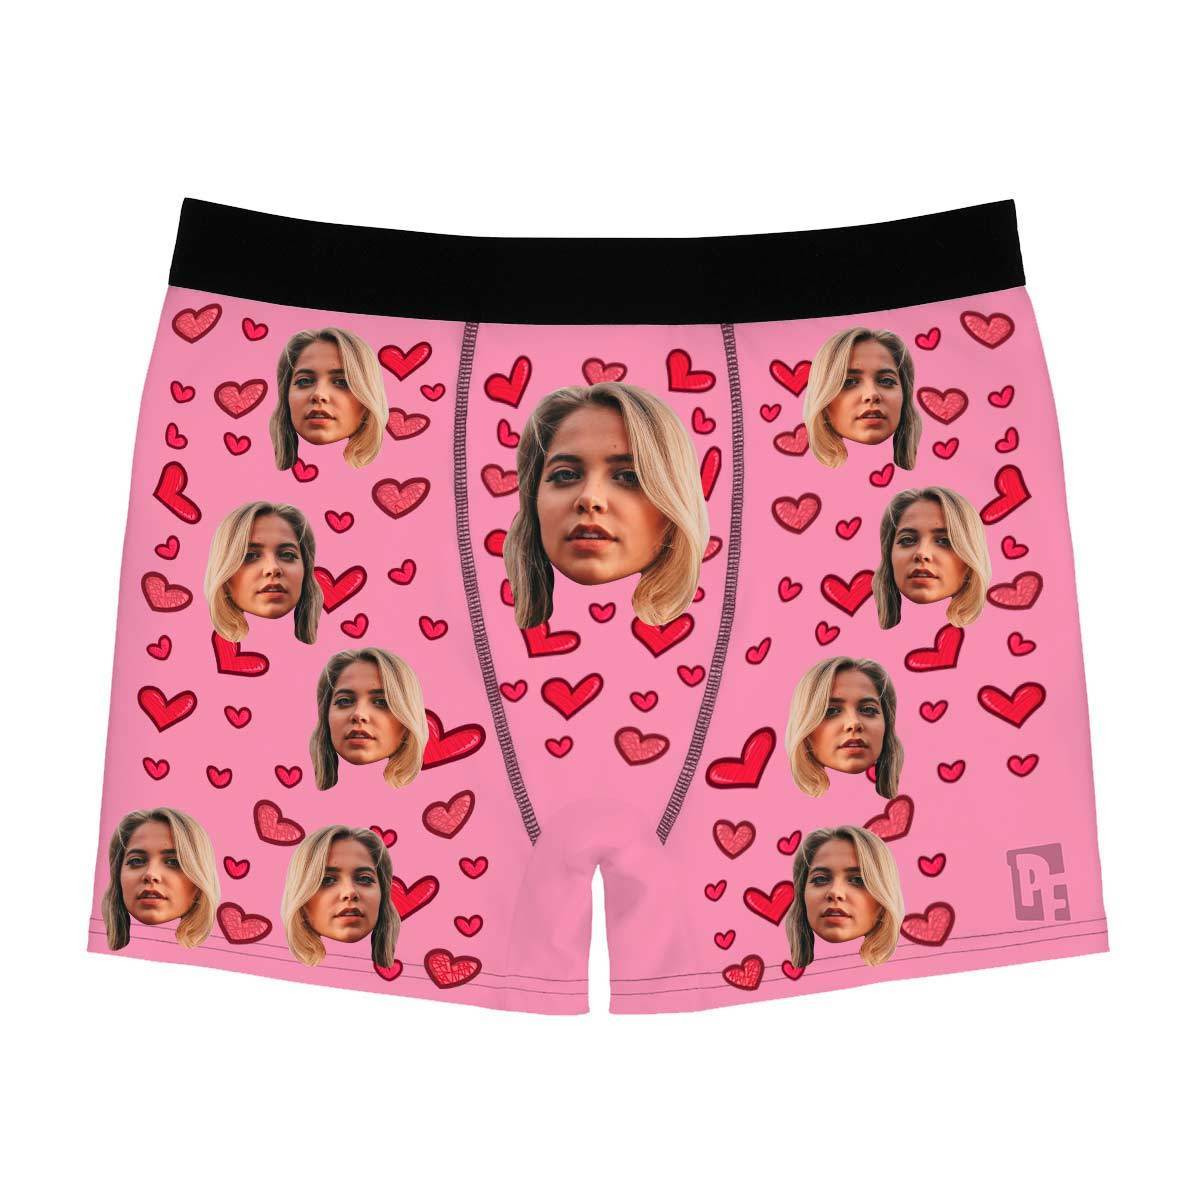 Red Heart men's boxer briefs personalized with photo printed on them